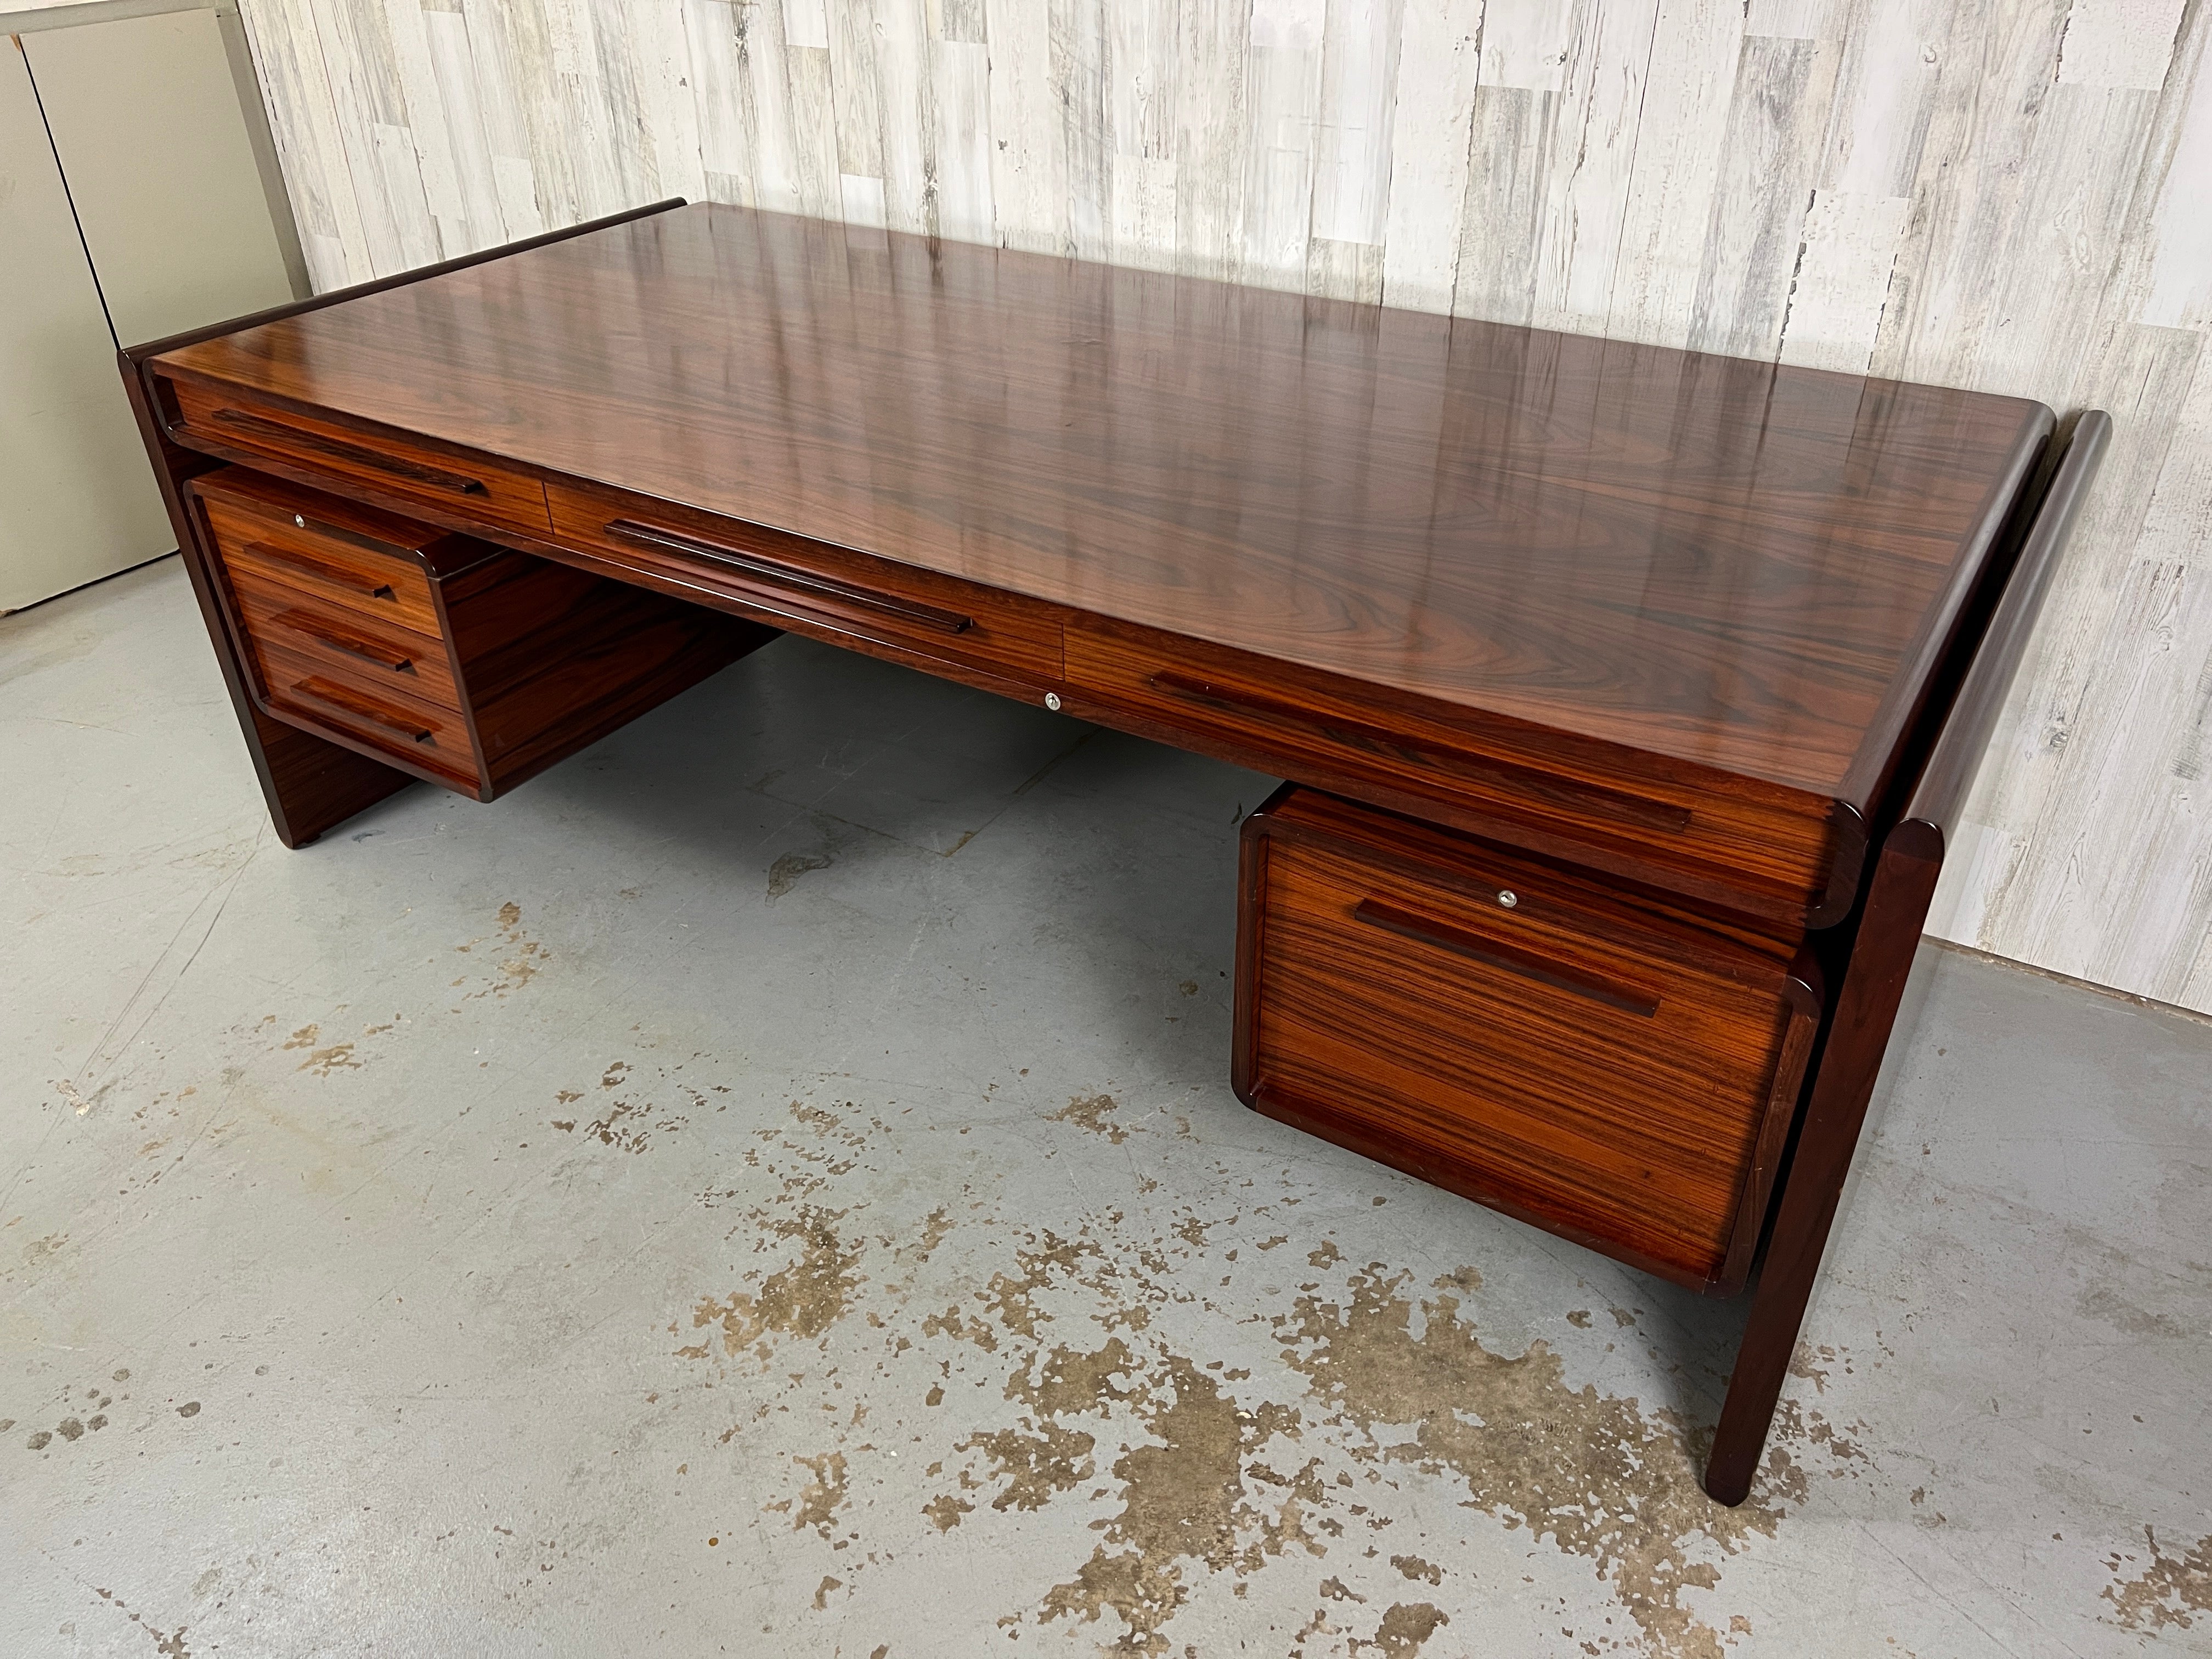 Dyrlund rich rosewood executive desk with a finished back that makes it easy to float in an office. Tons of drawers for storage for the business person.